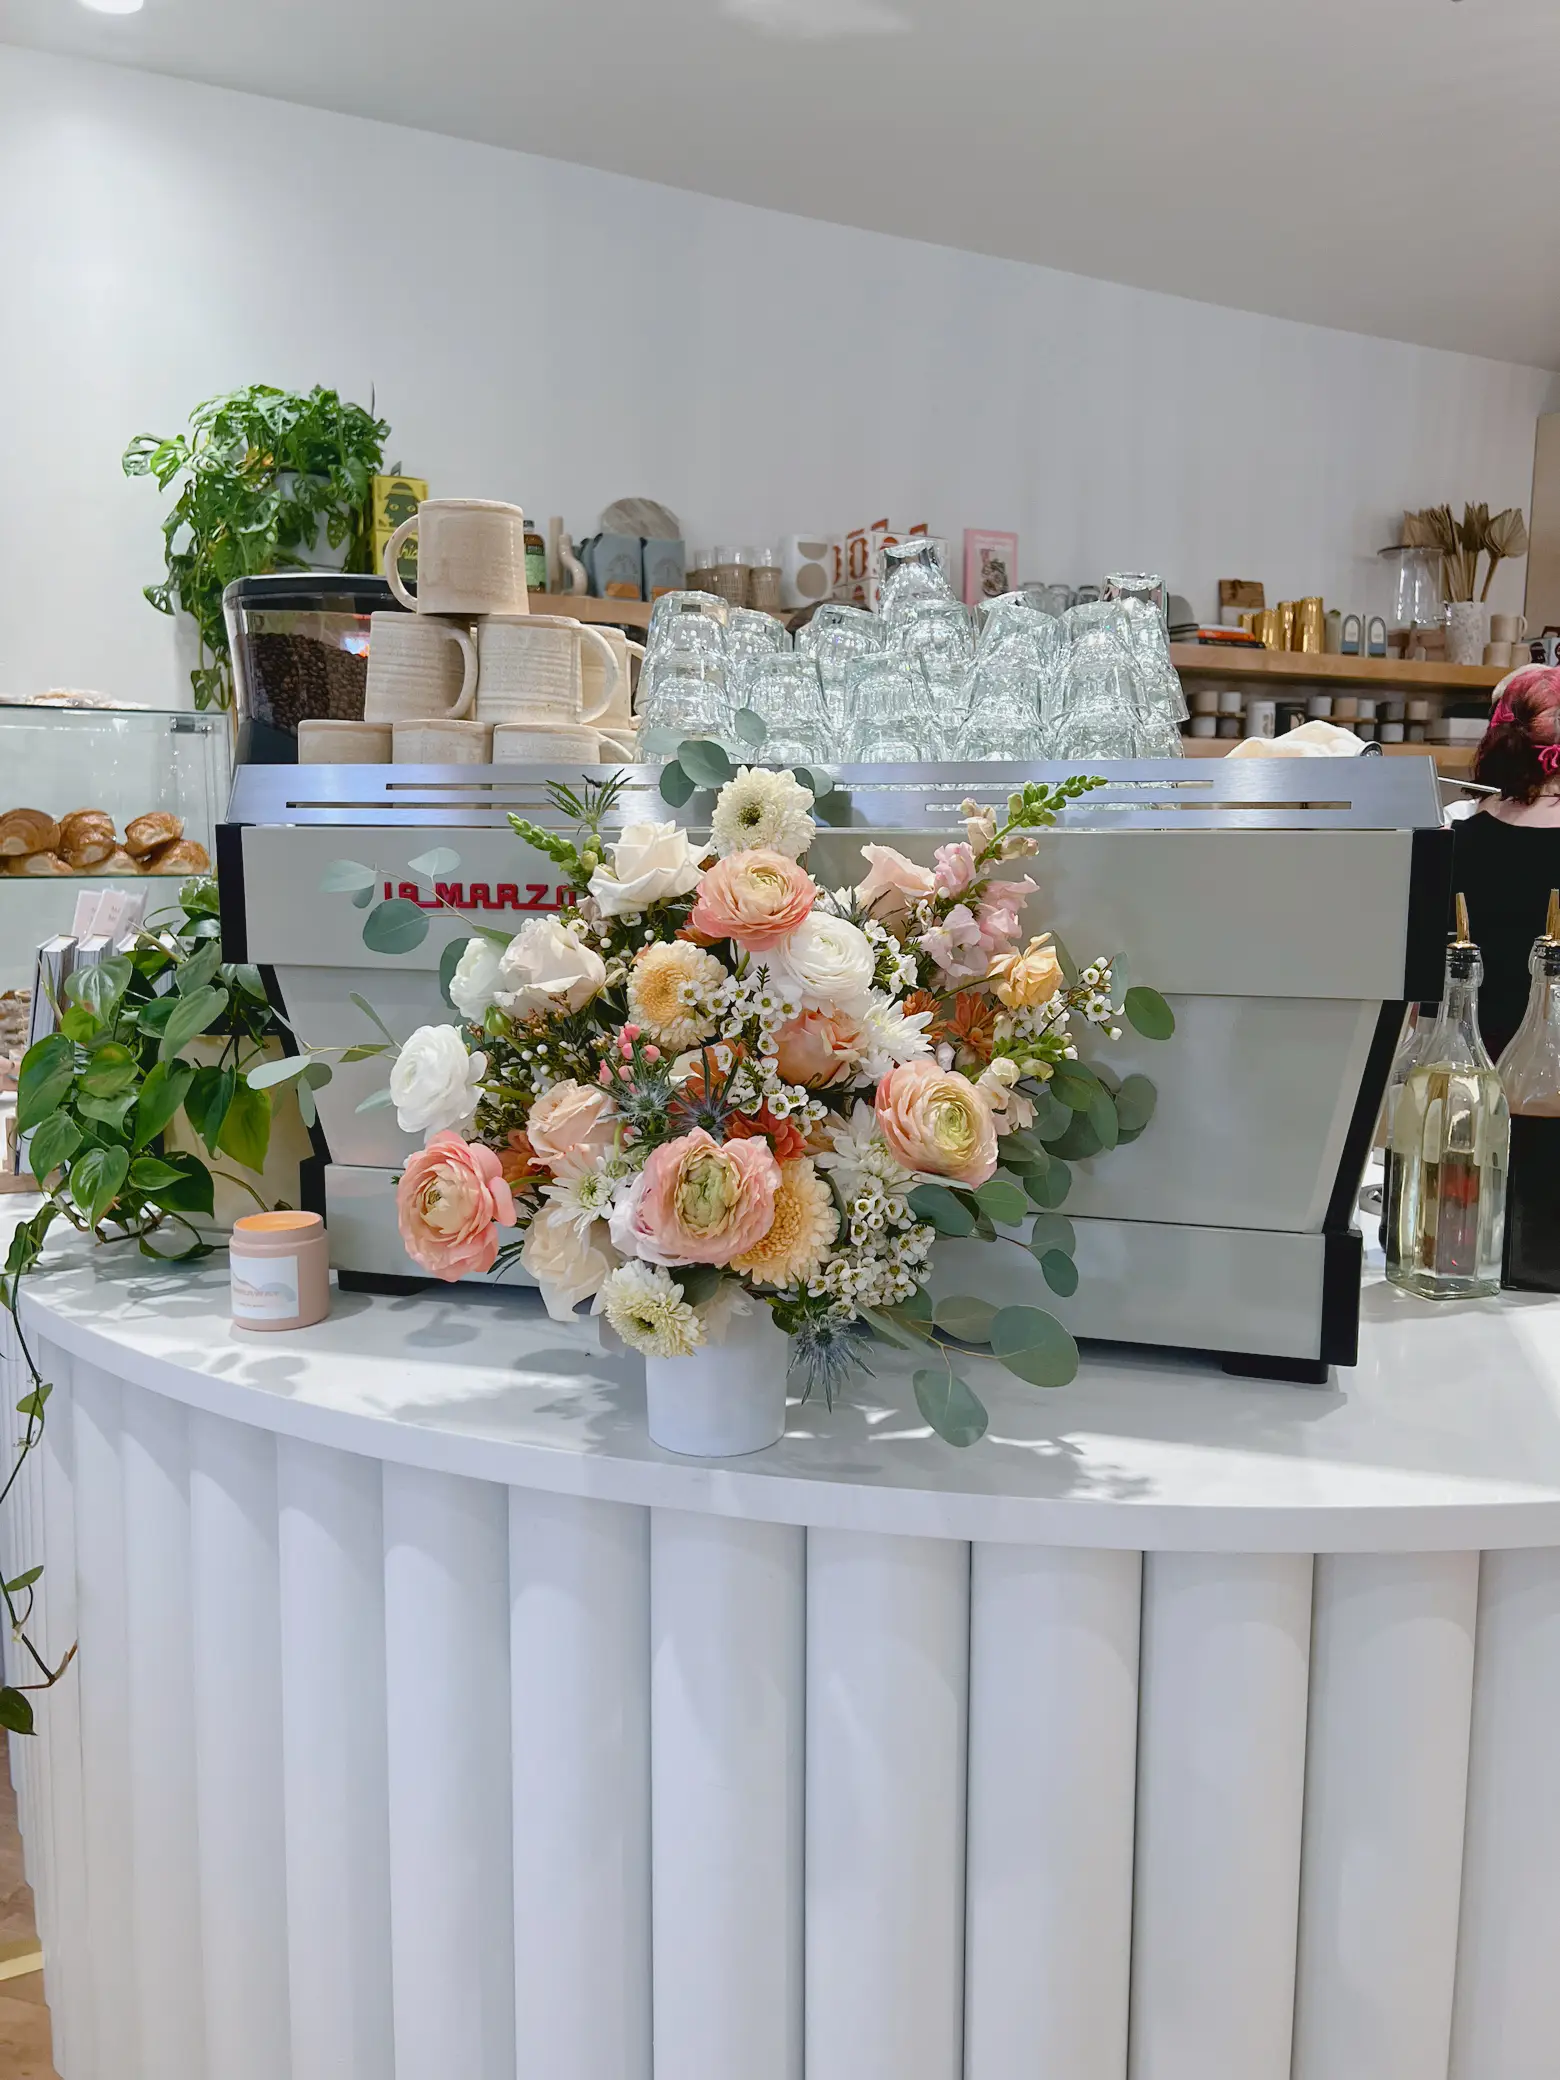  A coffee shop with a counter and a vase of flowers on it.